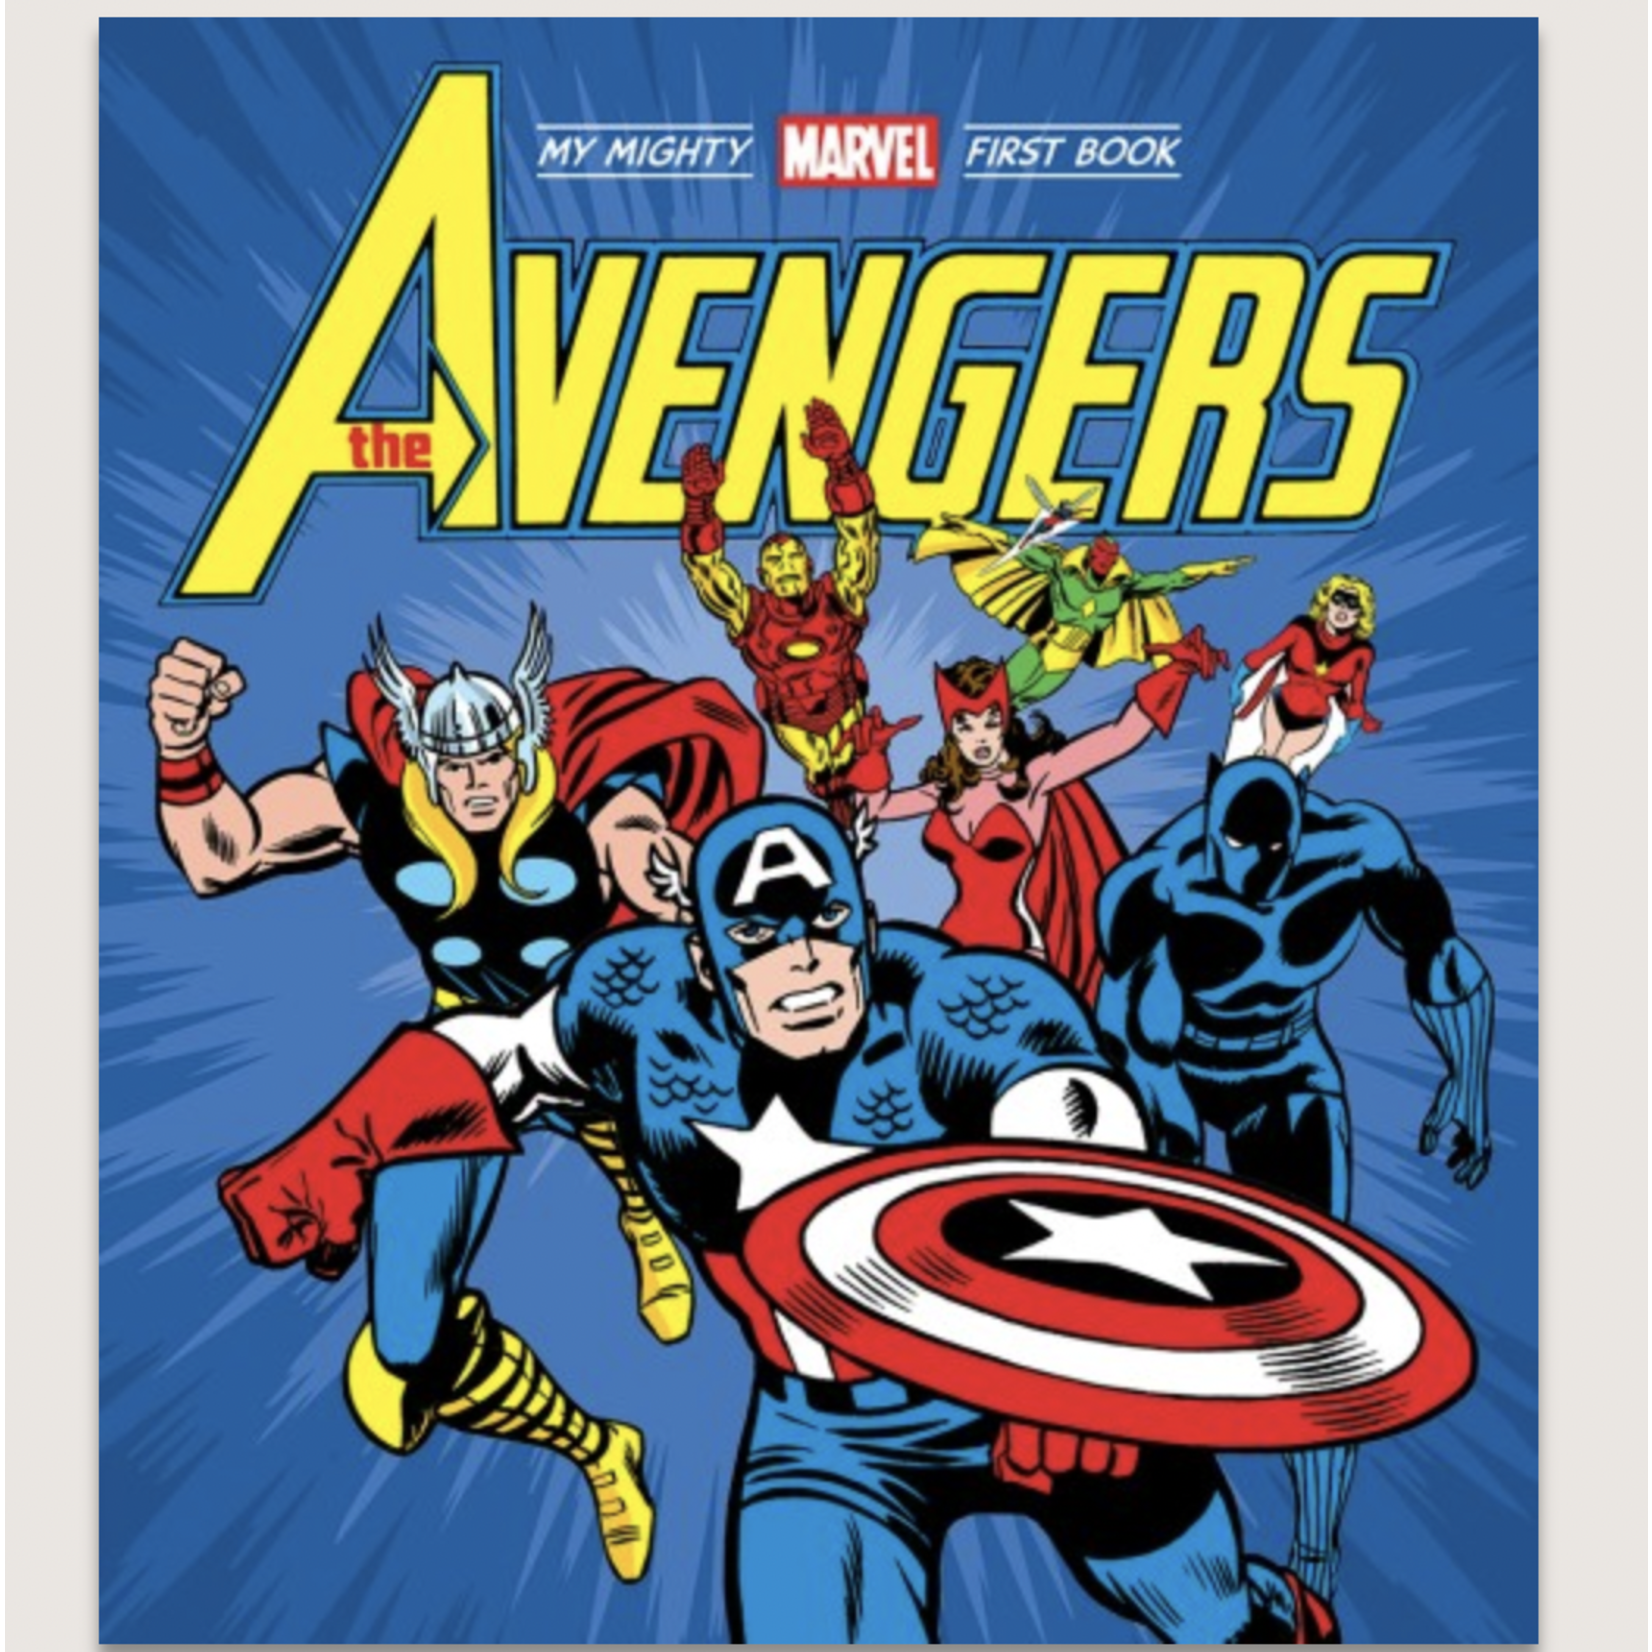 Abrams THE AVENGERS: MY MIGHTY MARVEL FIRST BOOK